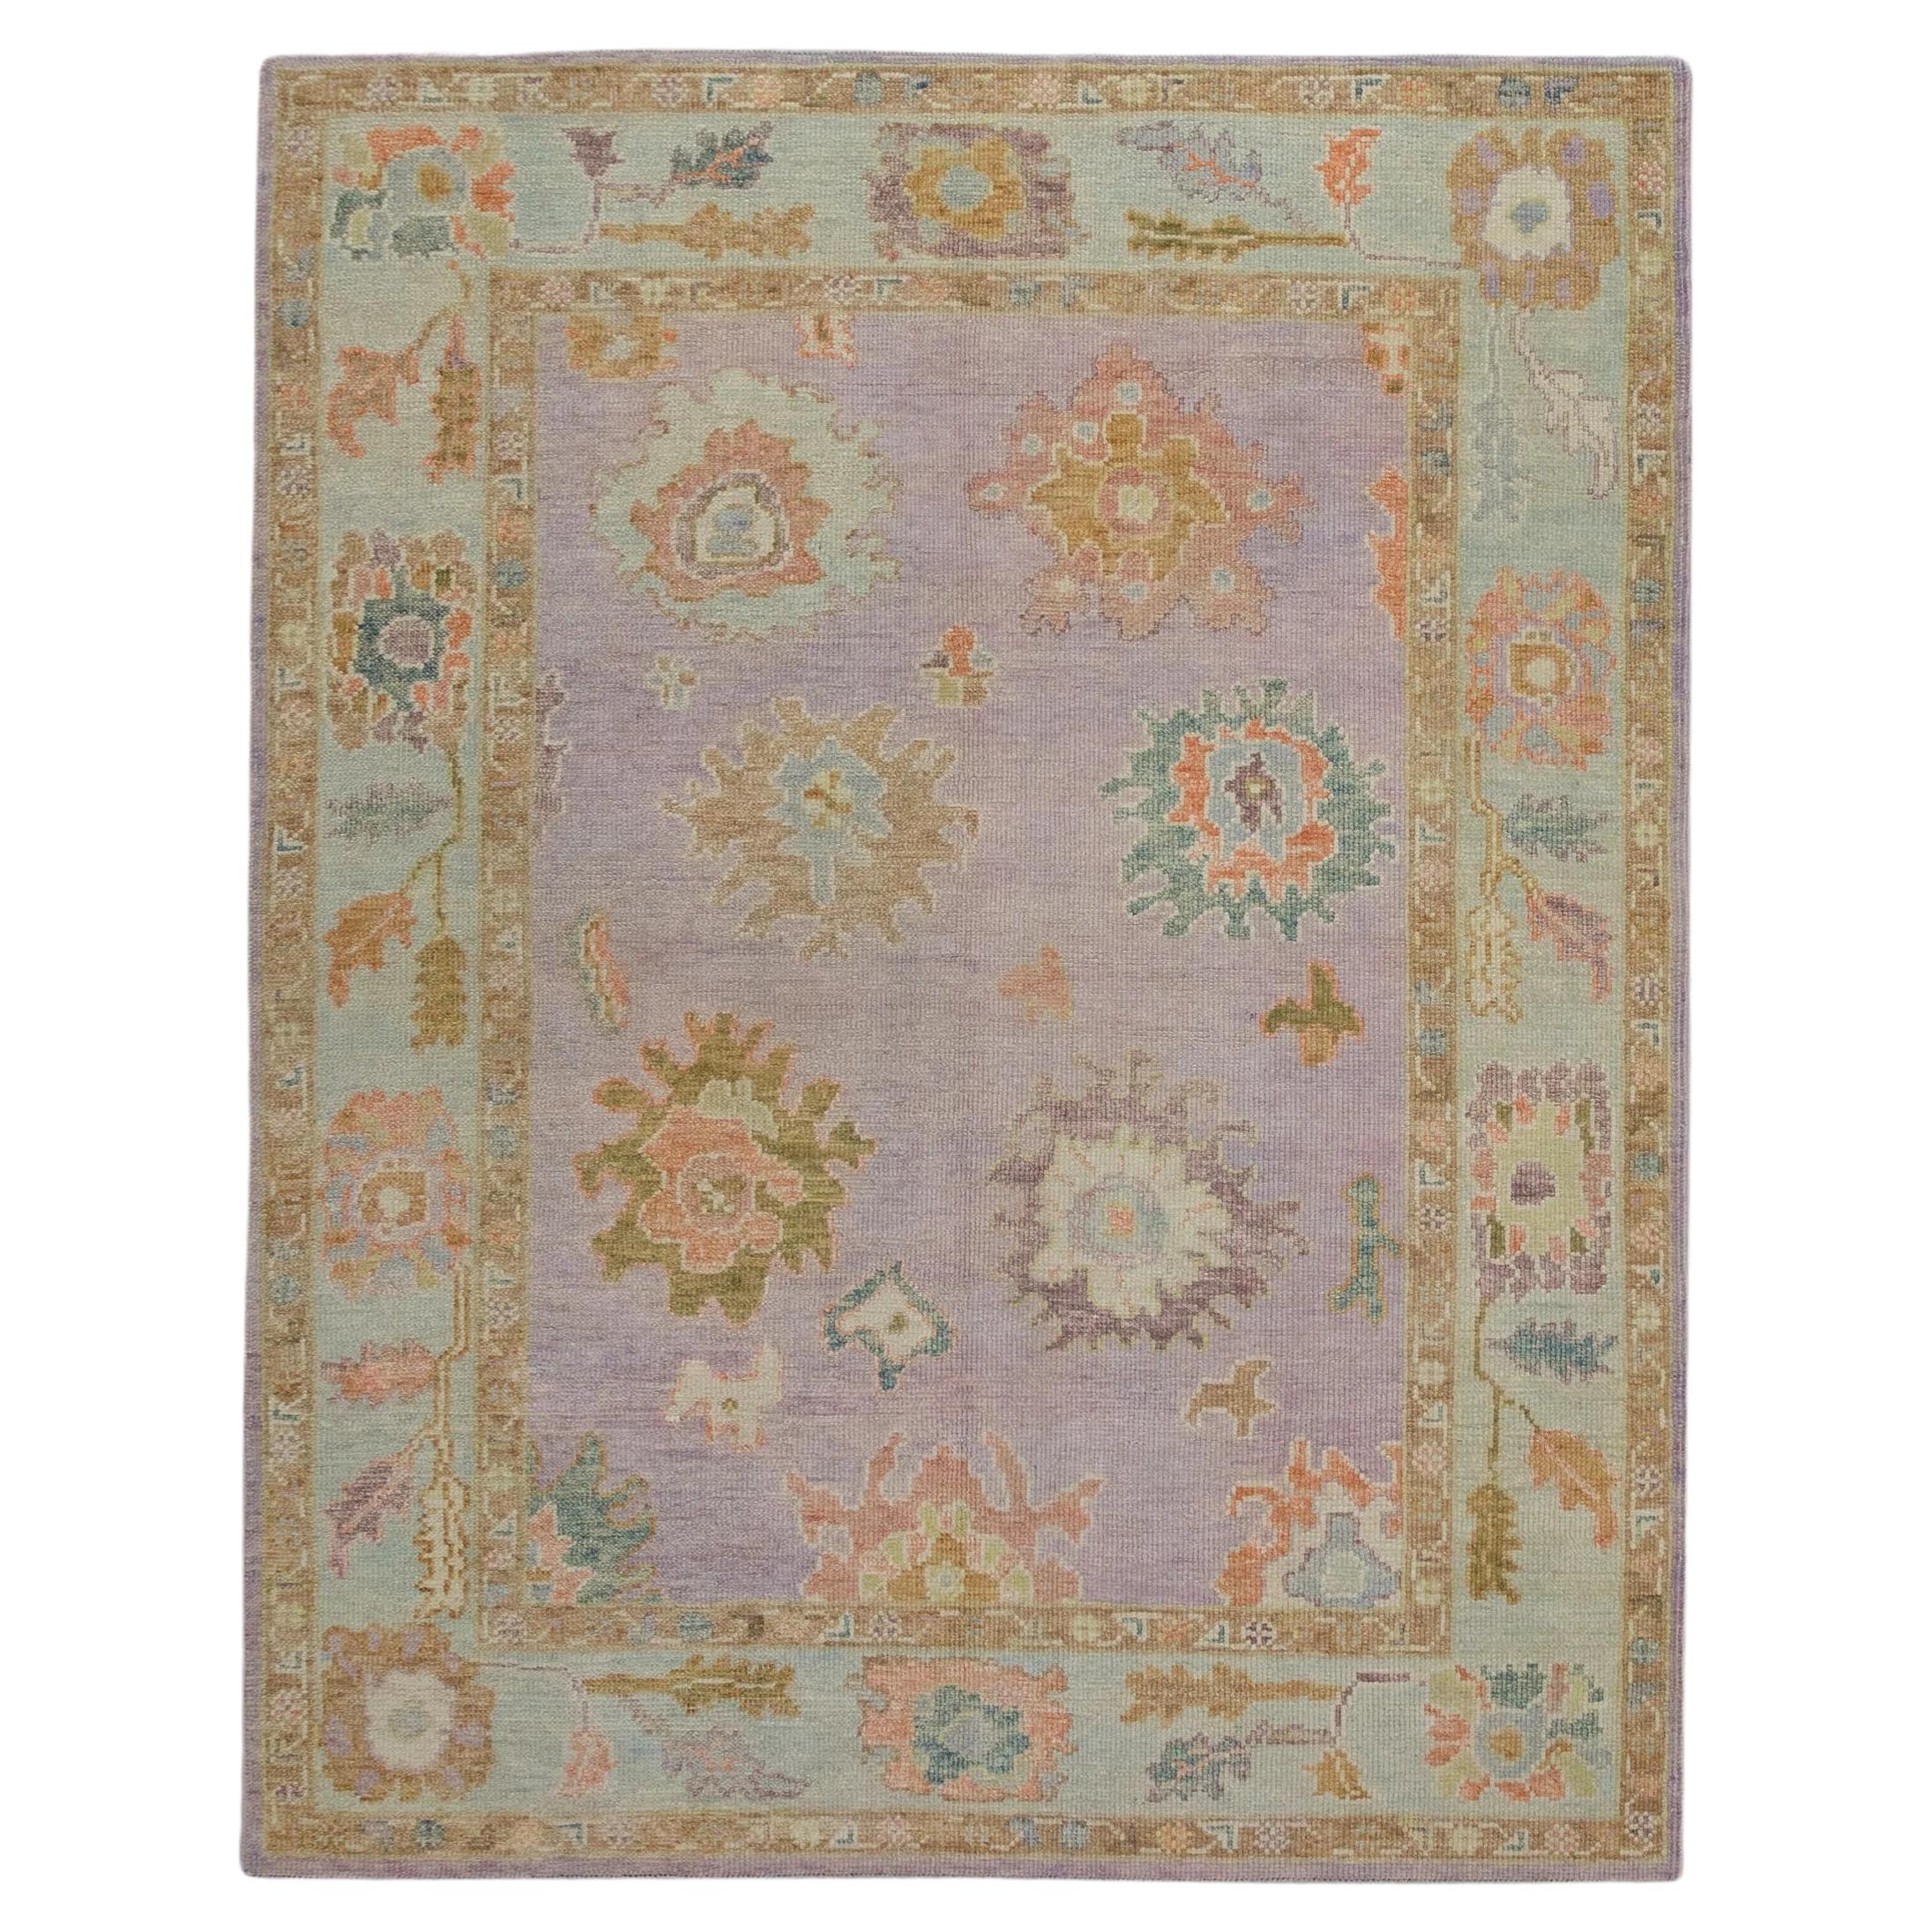 Soft Purple Handwoven Wool Turkish Oushak Rug w/ Colorful Floral Design 5'1x6'8 For Sale